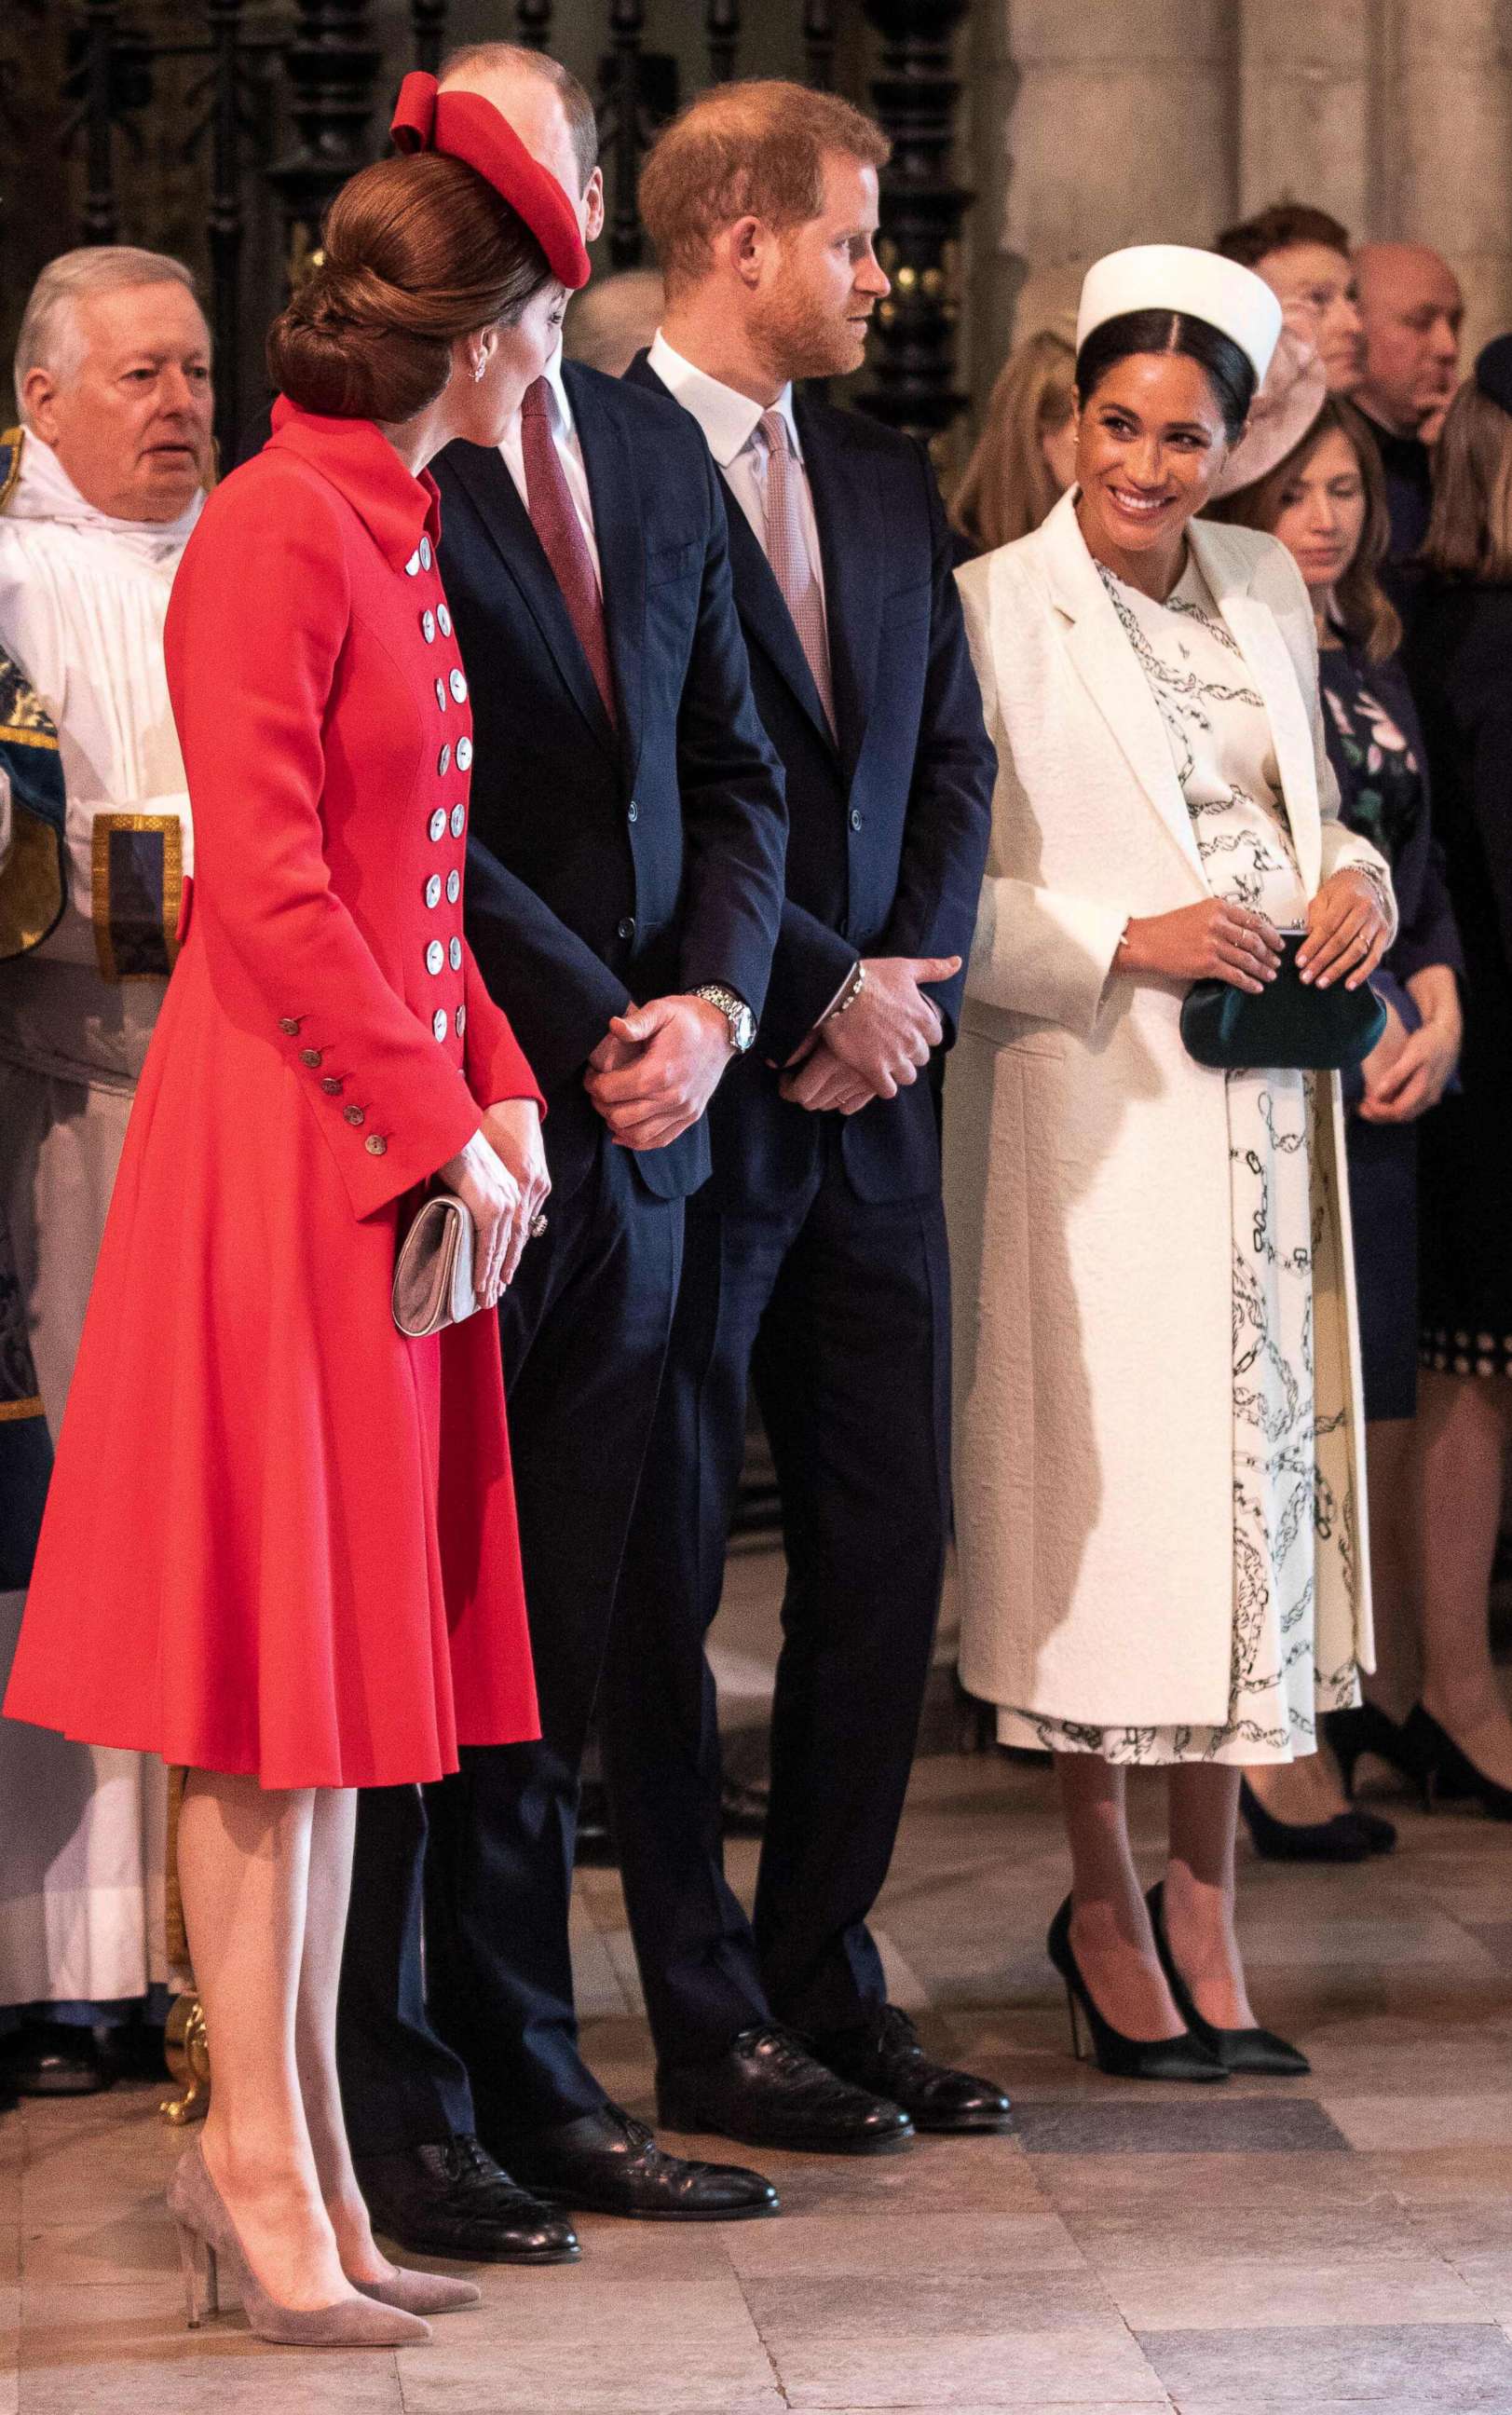 PHOTO: Britain's Catherine, Duchess of Cambridge, talks with Britain's Meghan, Duchess of Sussex, Prince William and Prince Harry stand by attending the Commonwealth Day service at Westminster Abbey in London on March 11, 2019.